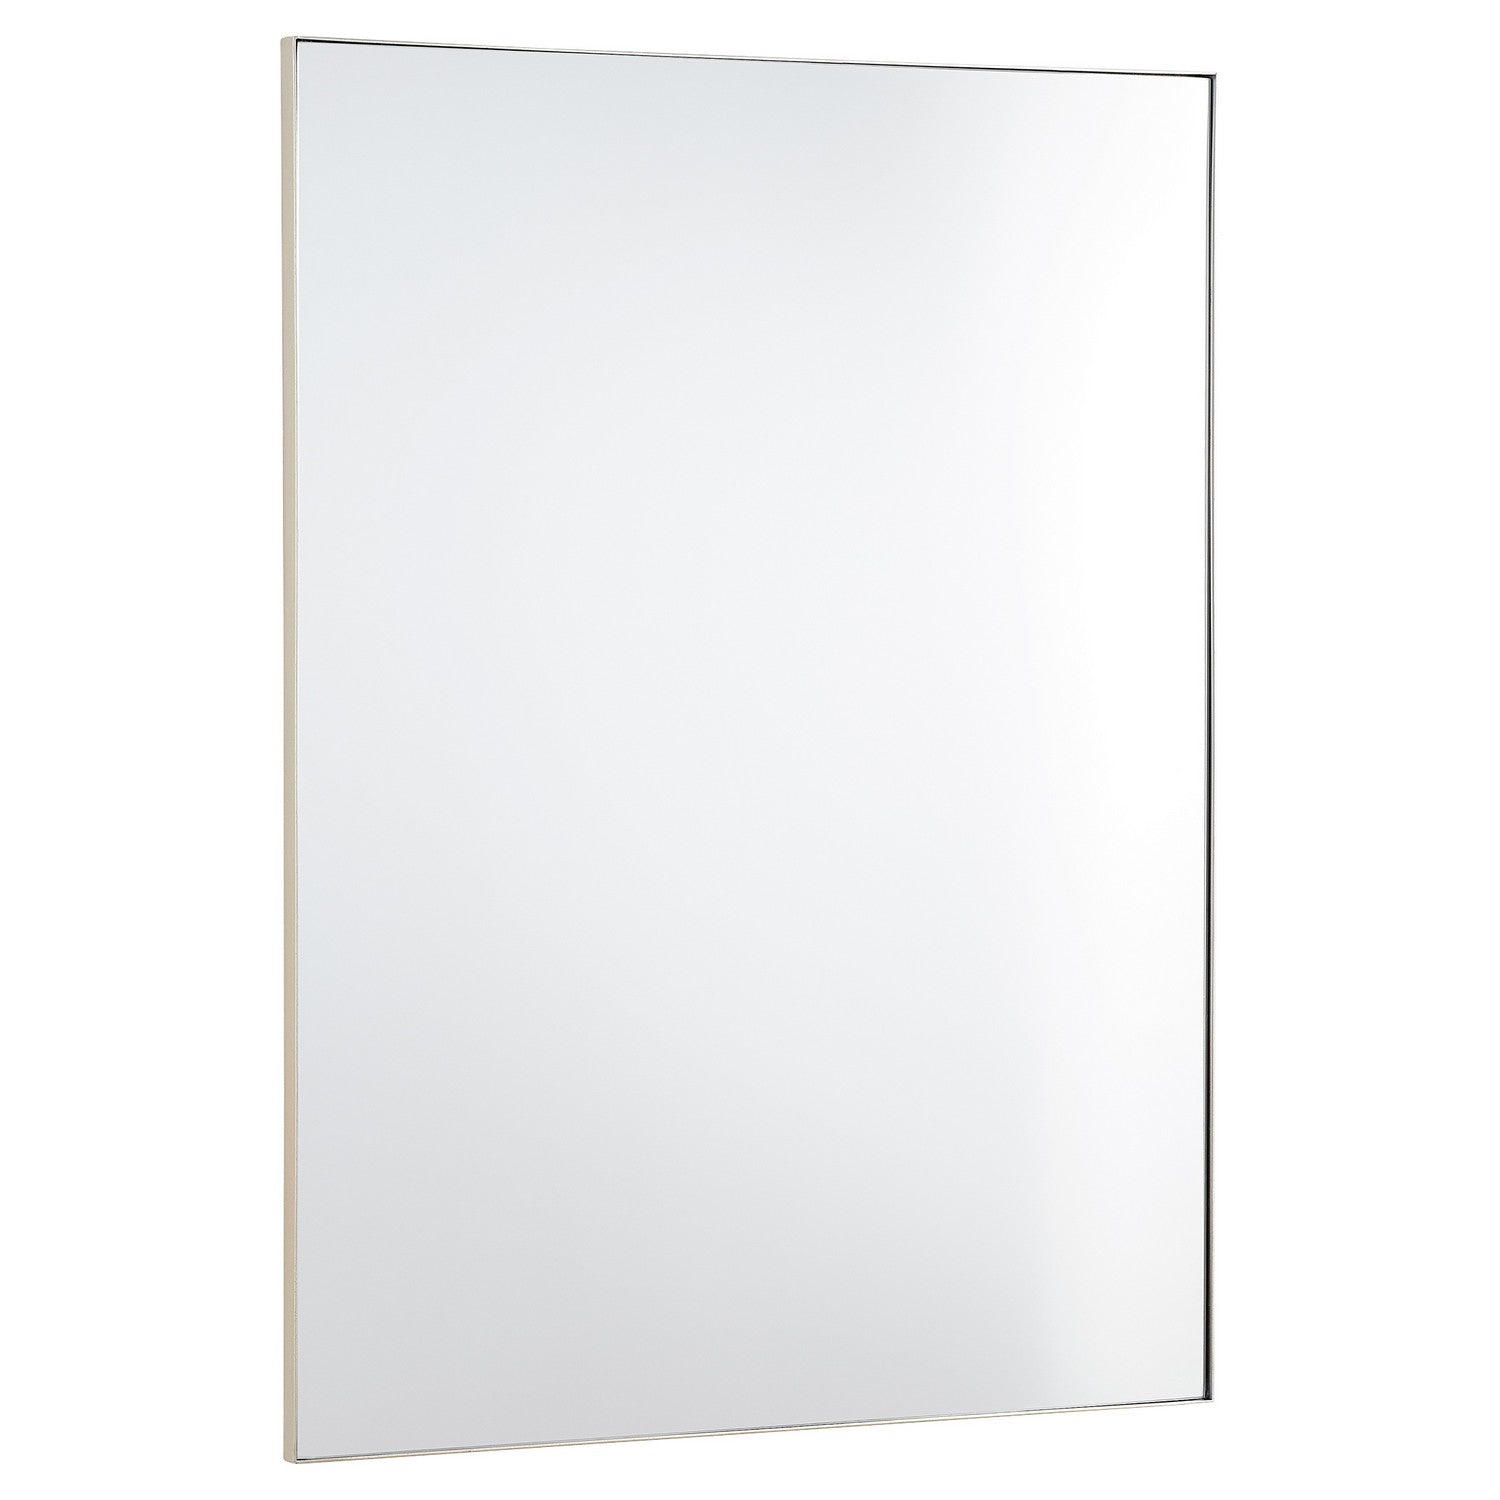 Quorum 11-3040-61 Mirror - Silver Finished